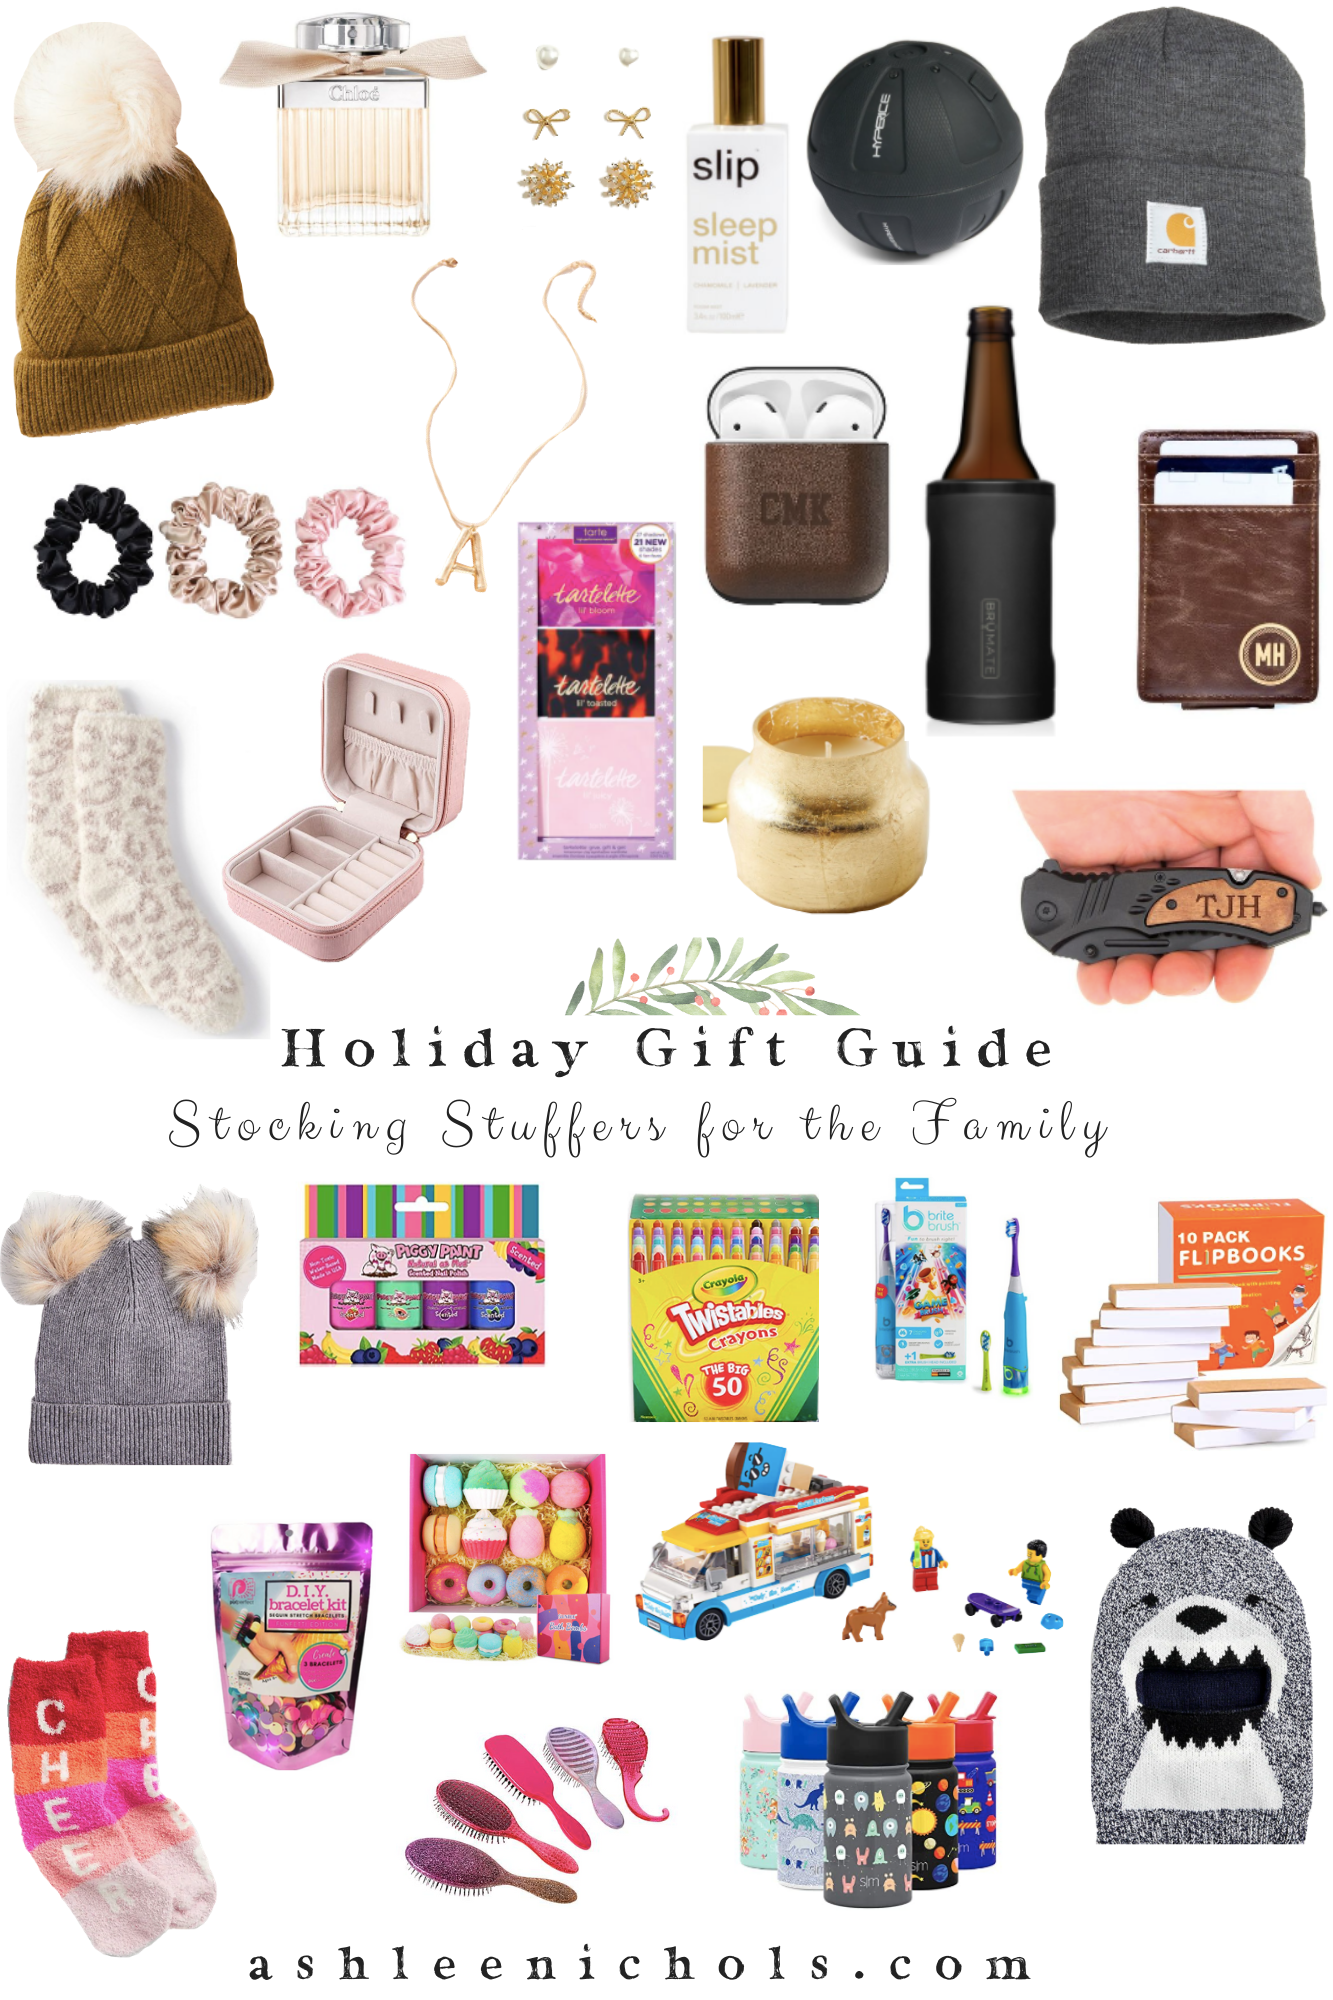 The Best Stocking Stuffer Ideas For Kids In 2020. You Don't Want